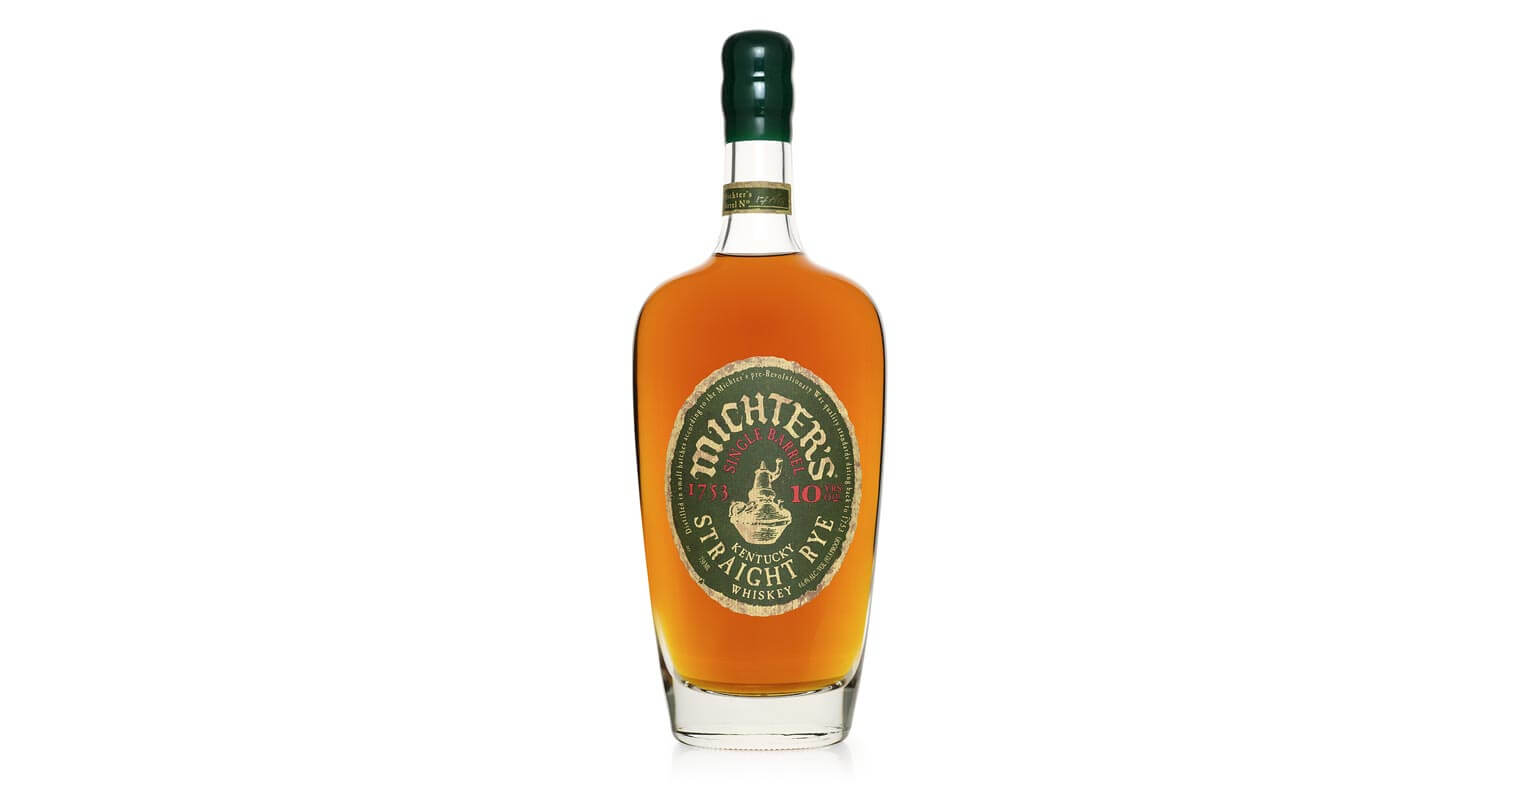 Michter's Releases 10 Year Single Barrel Kentucky Straight Rye, featured image